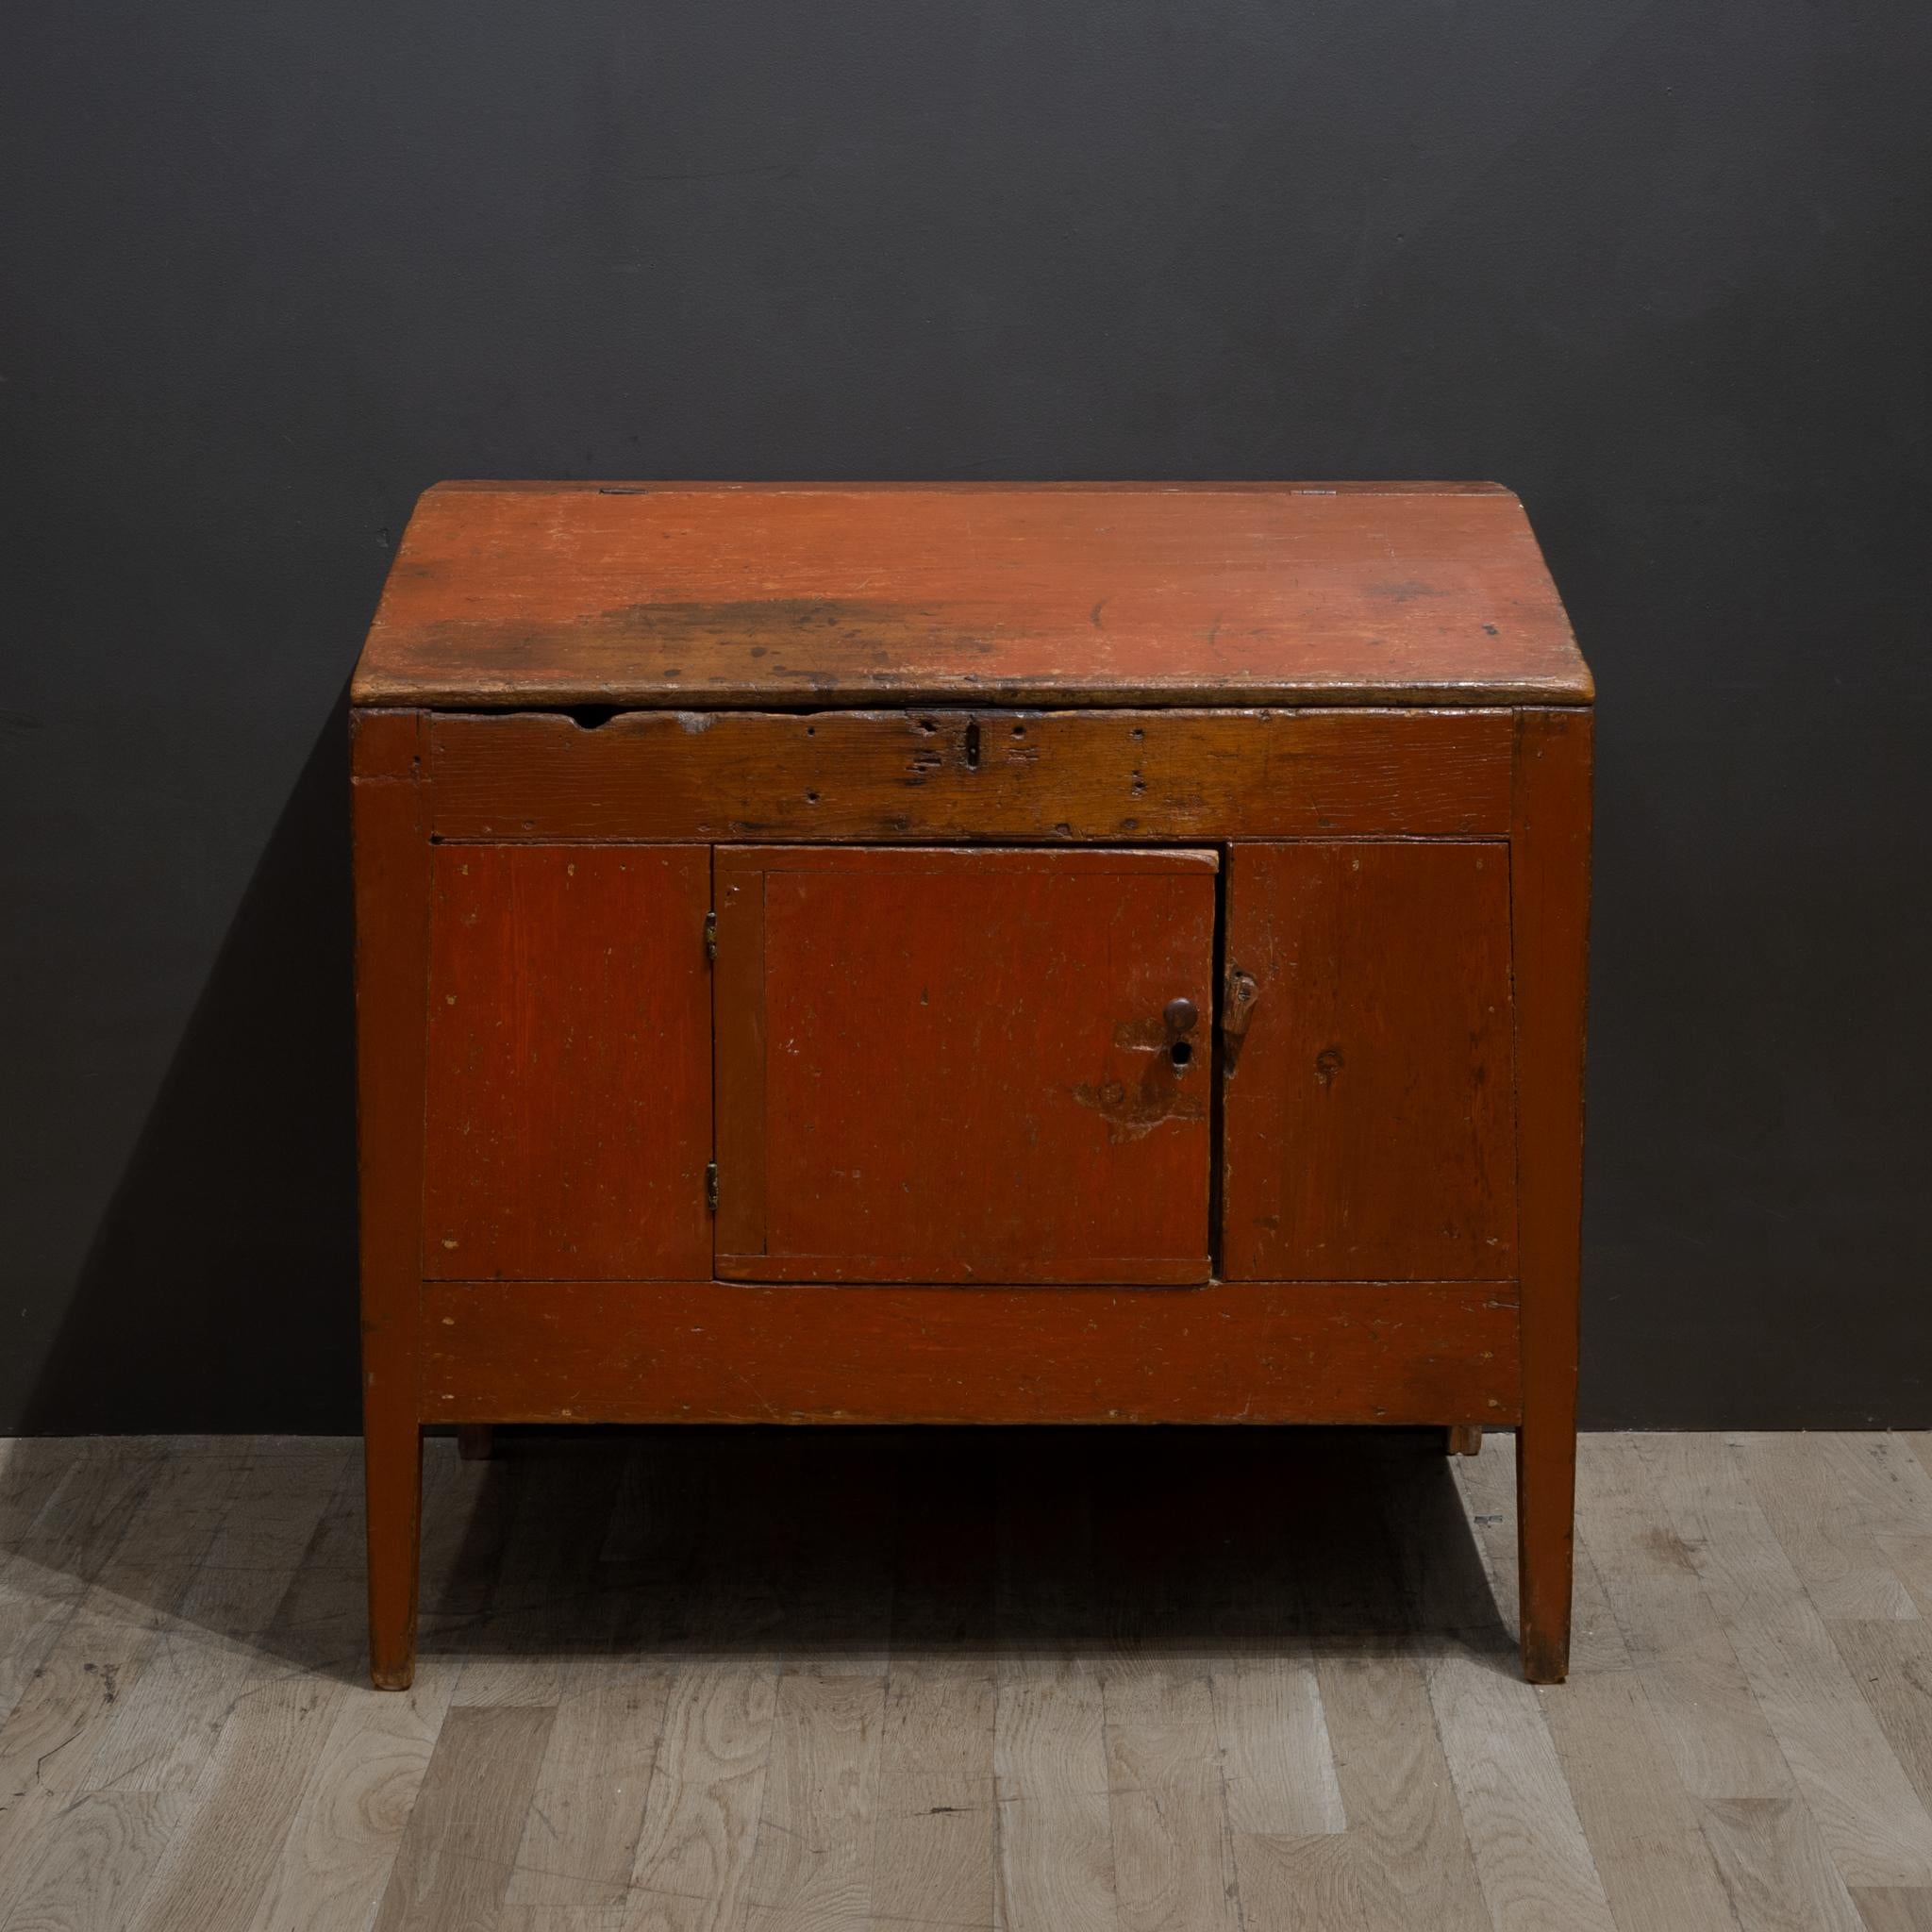 Rustic Early-Mid 19th c. Hand Painted Slant Desk, c.1820-1840 For Sale